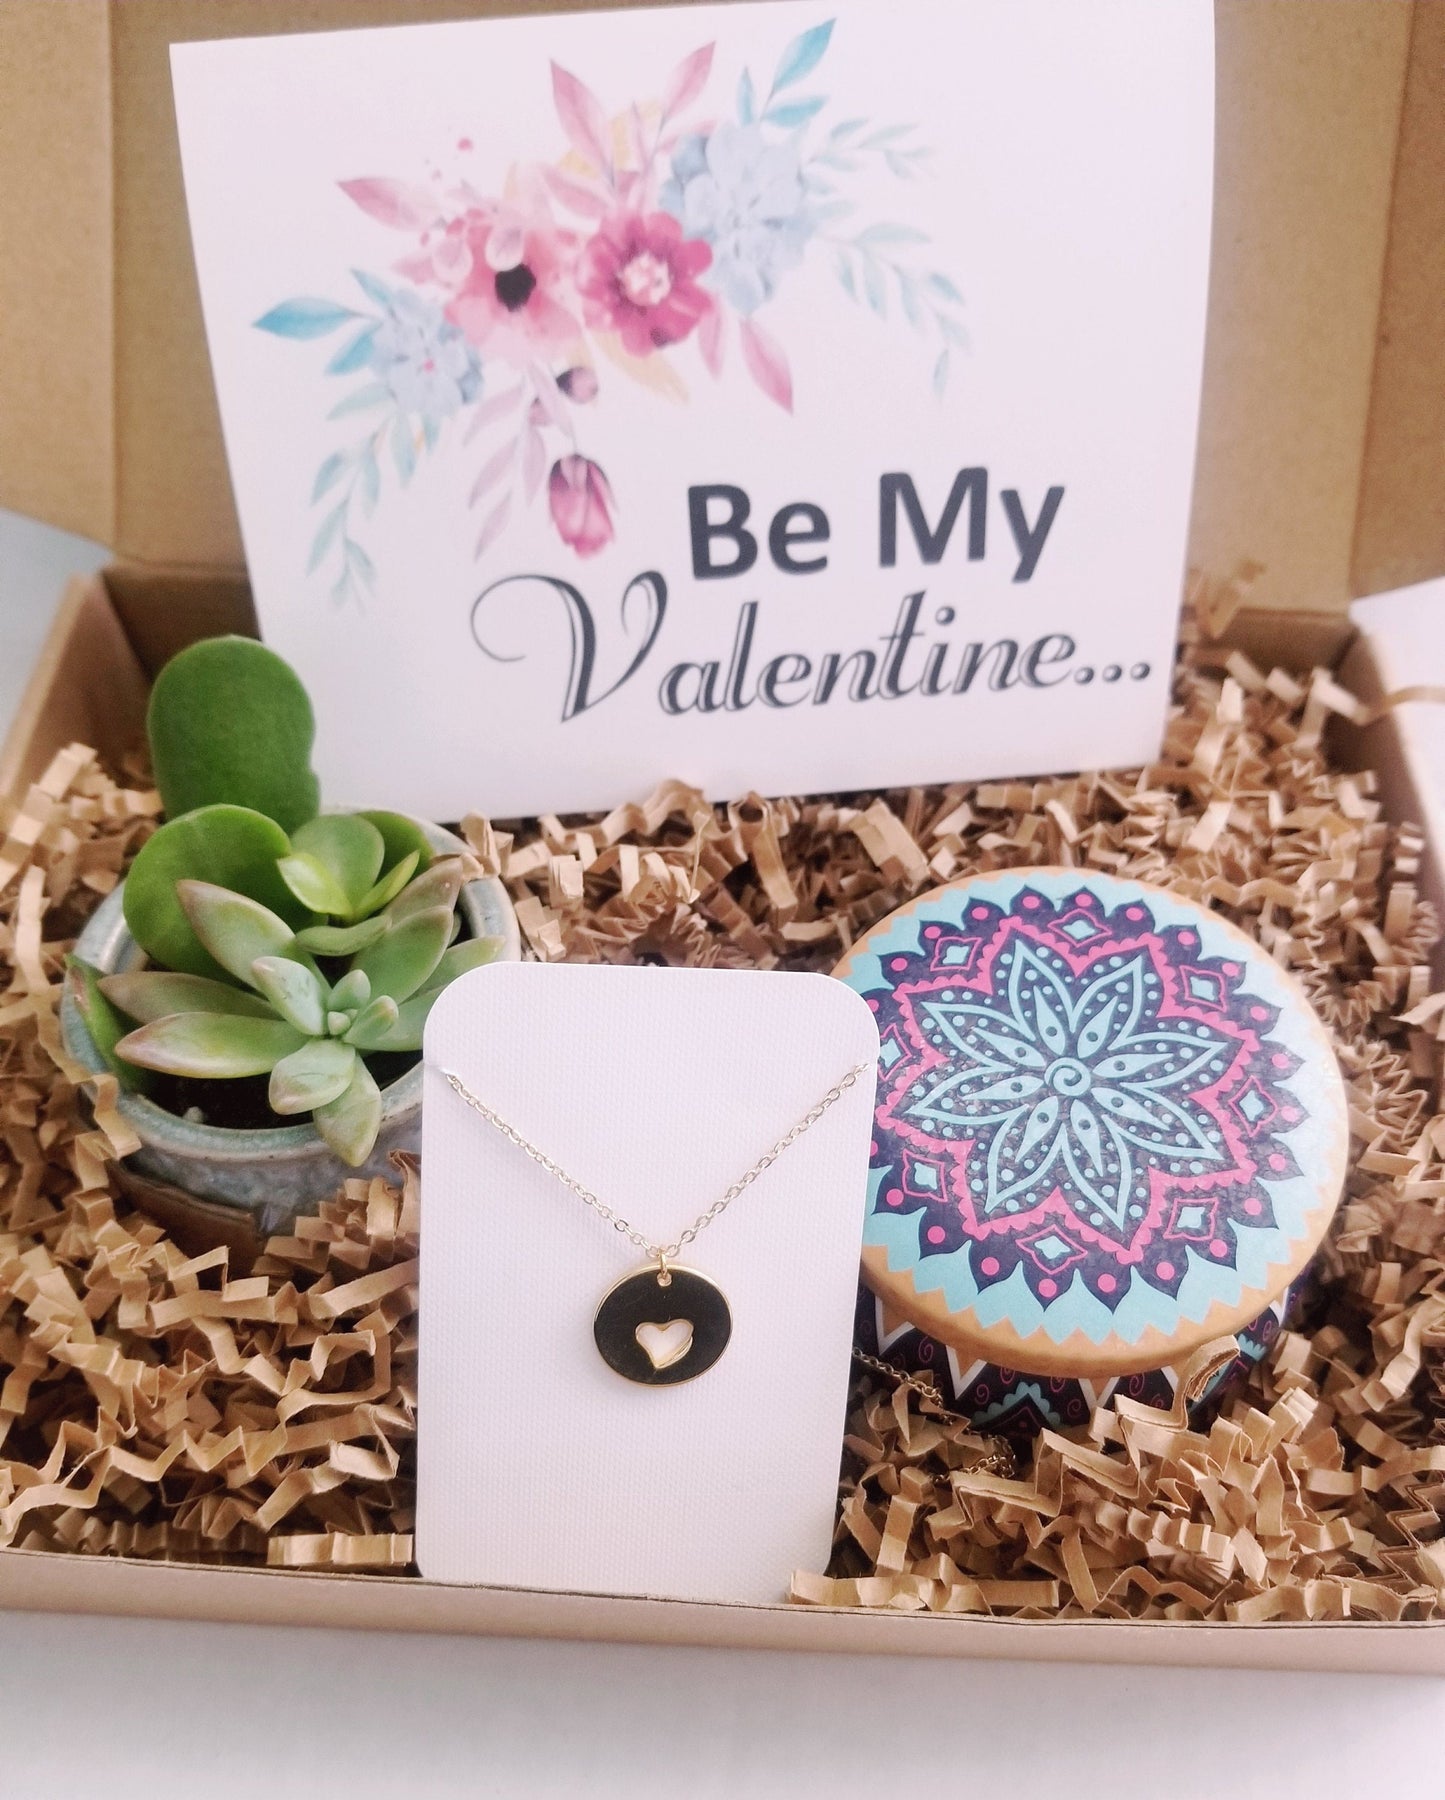 Be my Valentine gift set, Live succulent, Valentine's day gift, heart necklace